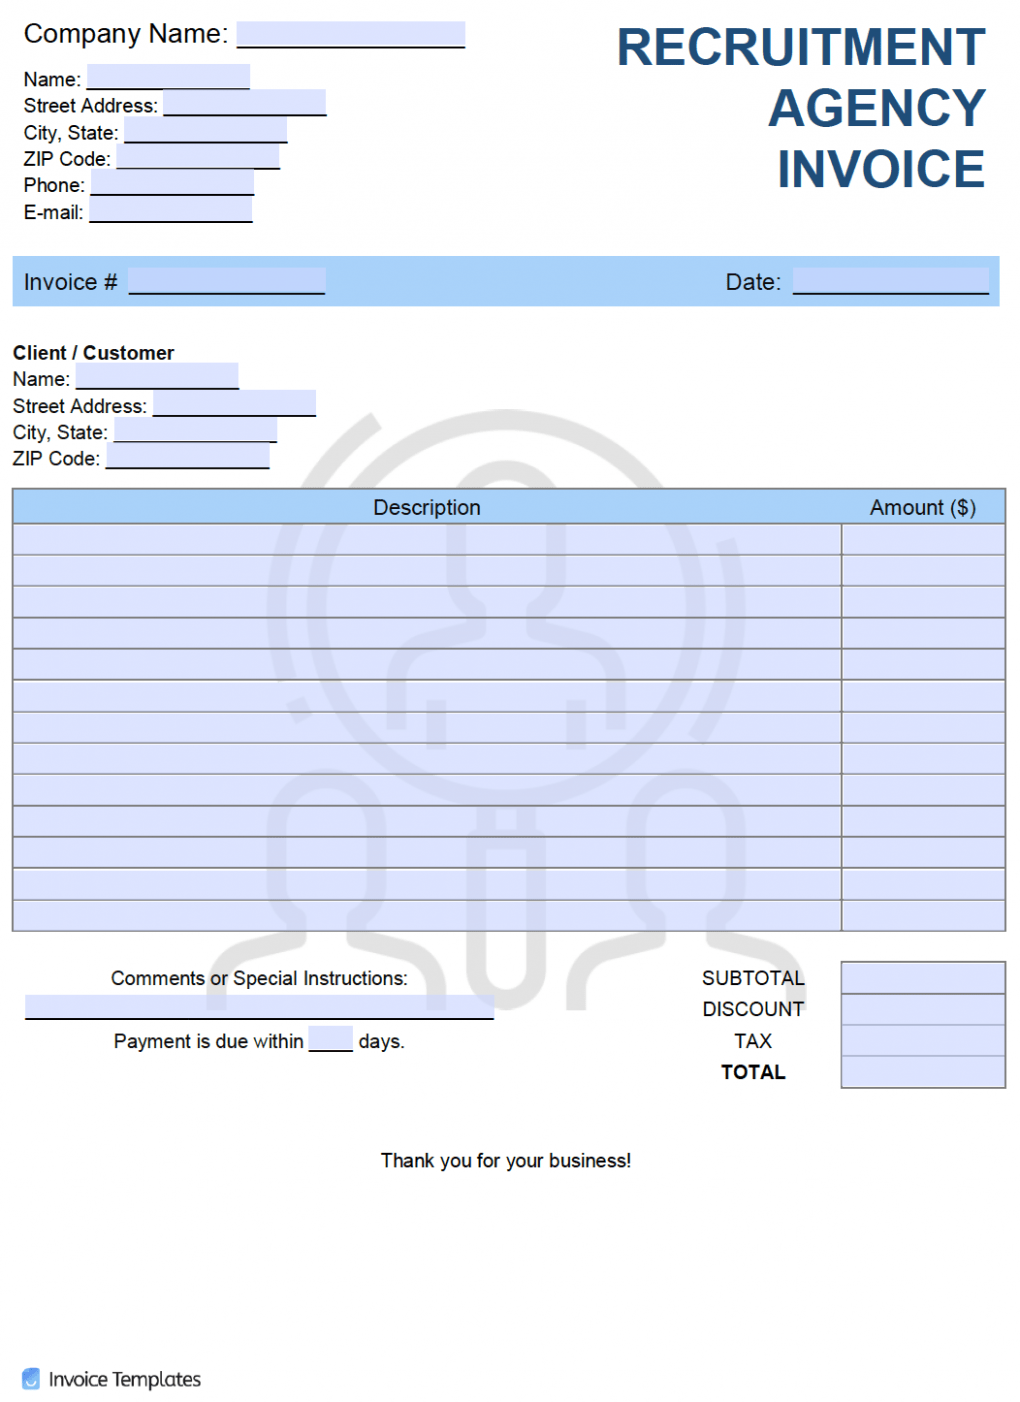 Printable Staffing Invoice Template Excel